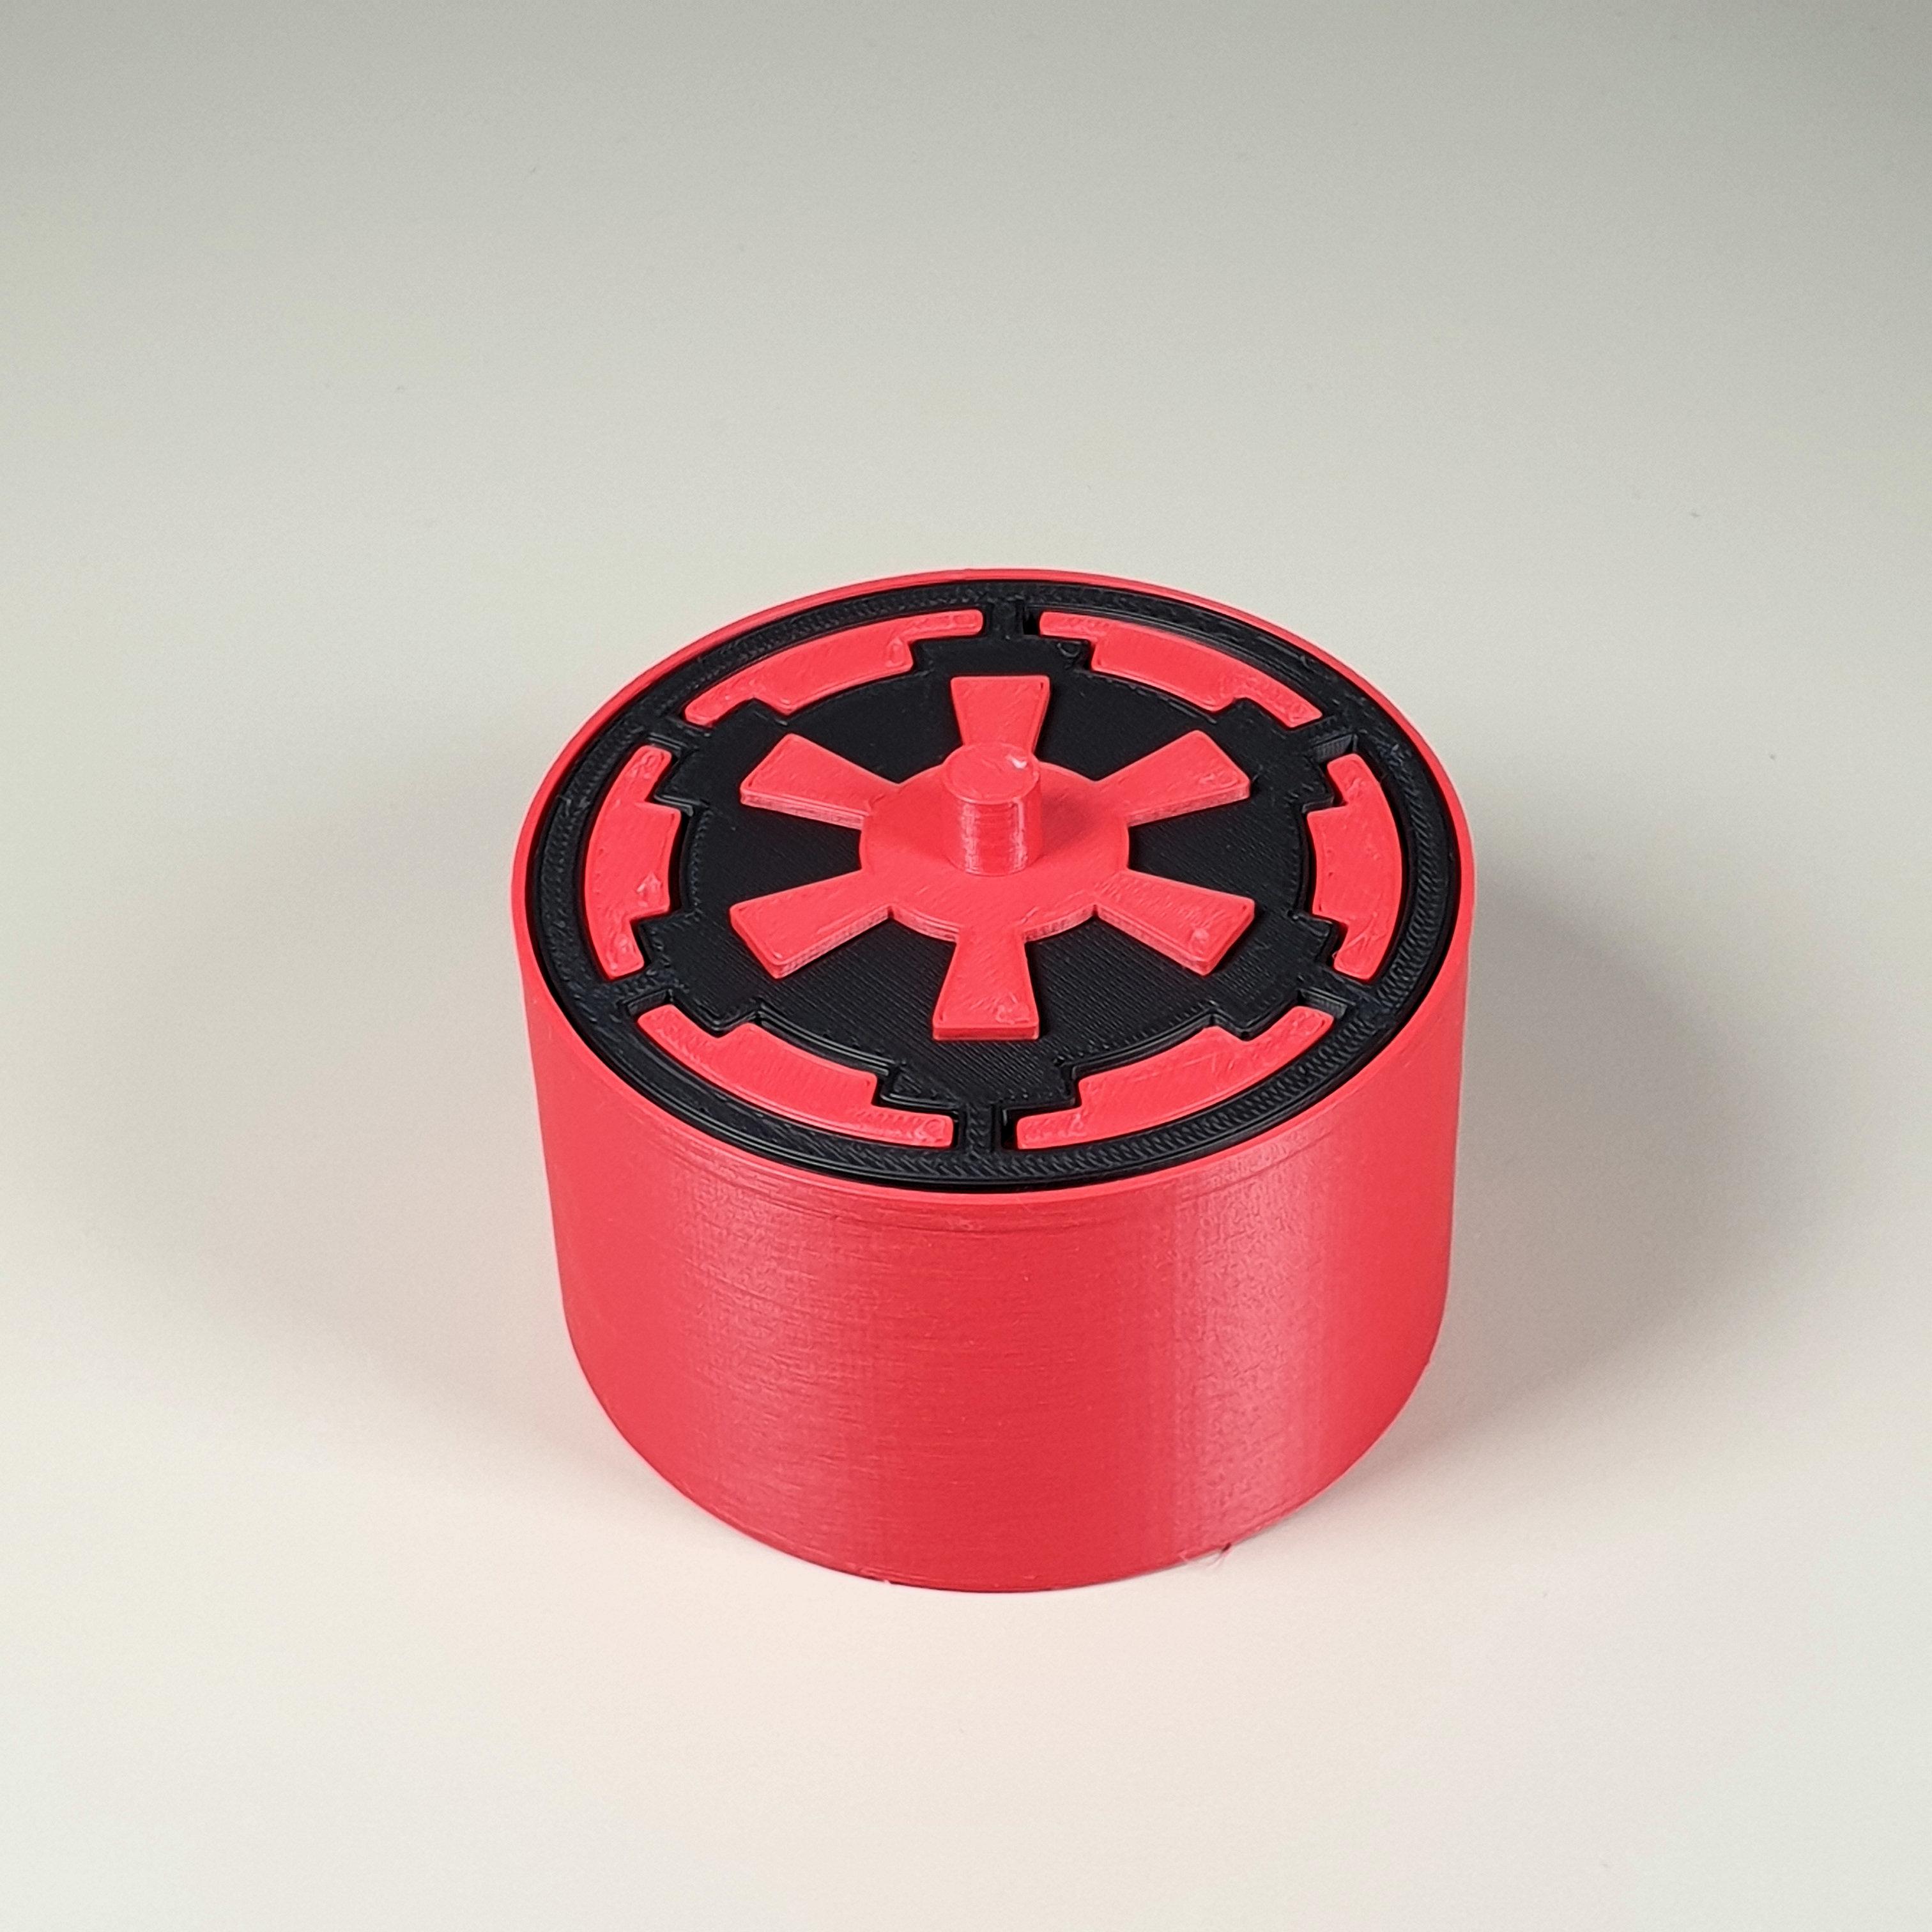 Star Wars boxes support-free 3d model